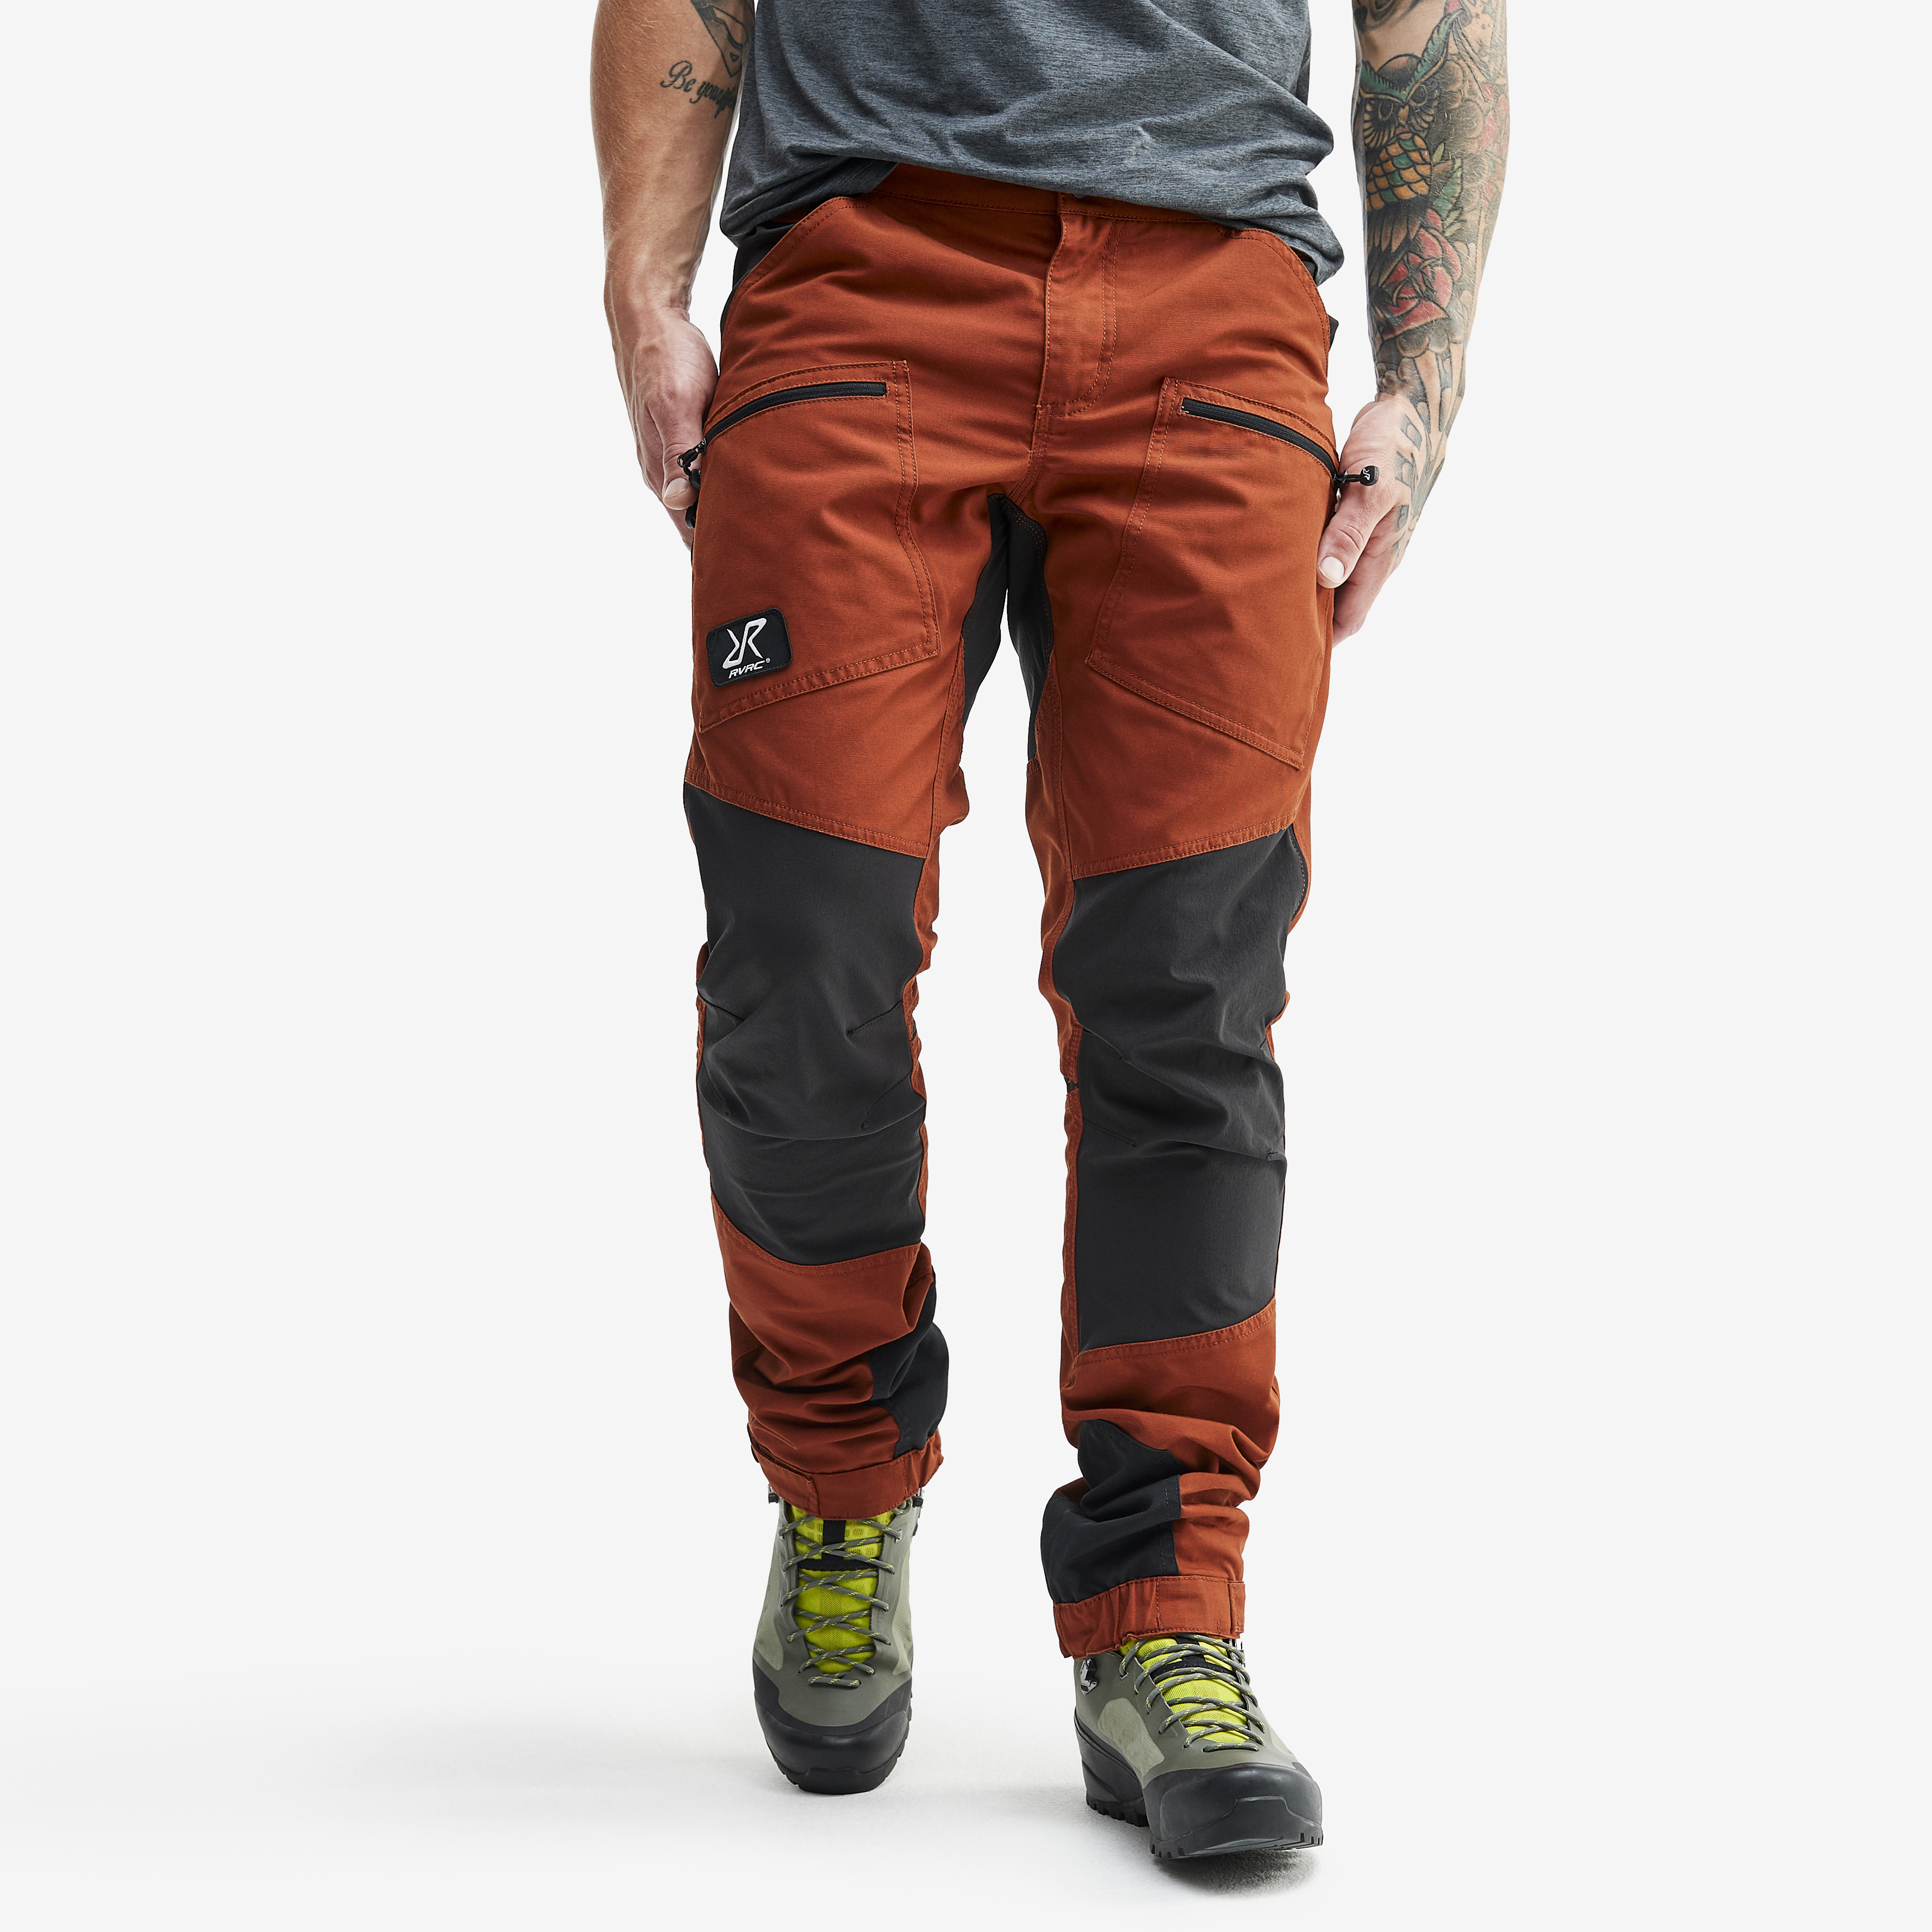 Nordwand Pro hiking pants for men in orange